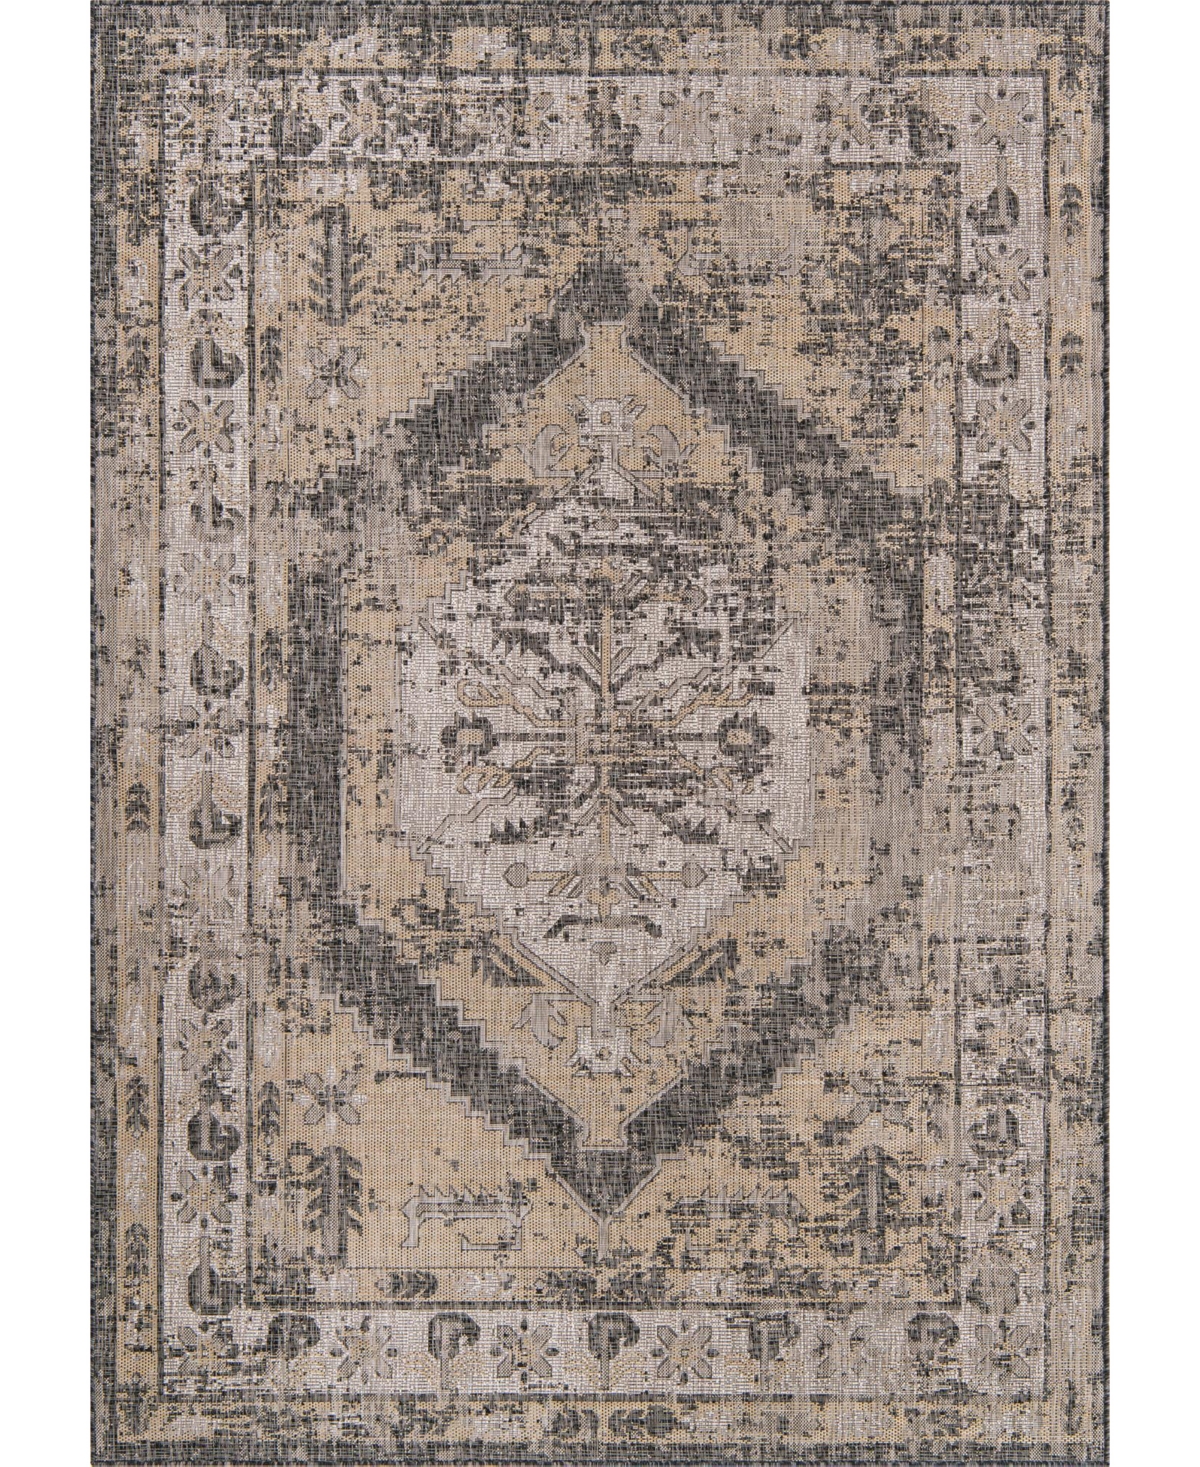 Bayshore Home Outdoor Bh Pashio Traditional Ii Valeria 7' X 10' Area Rug In Charcoal